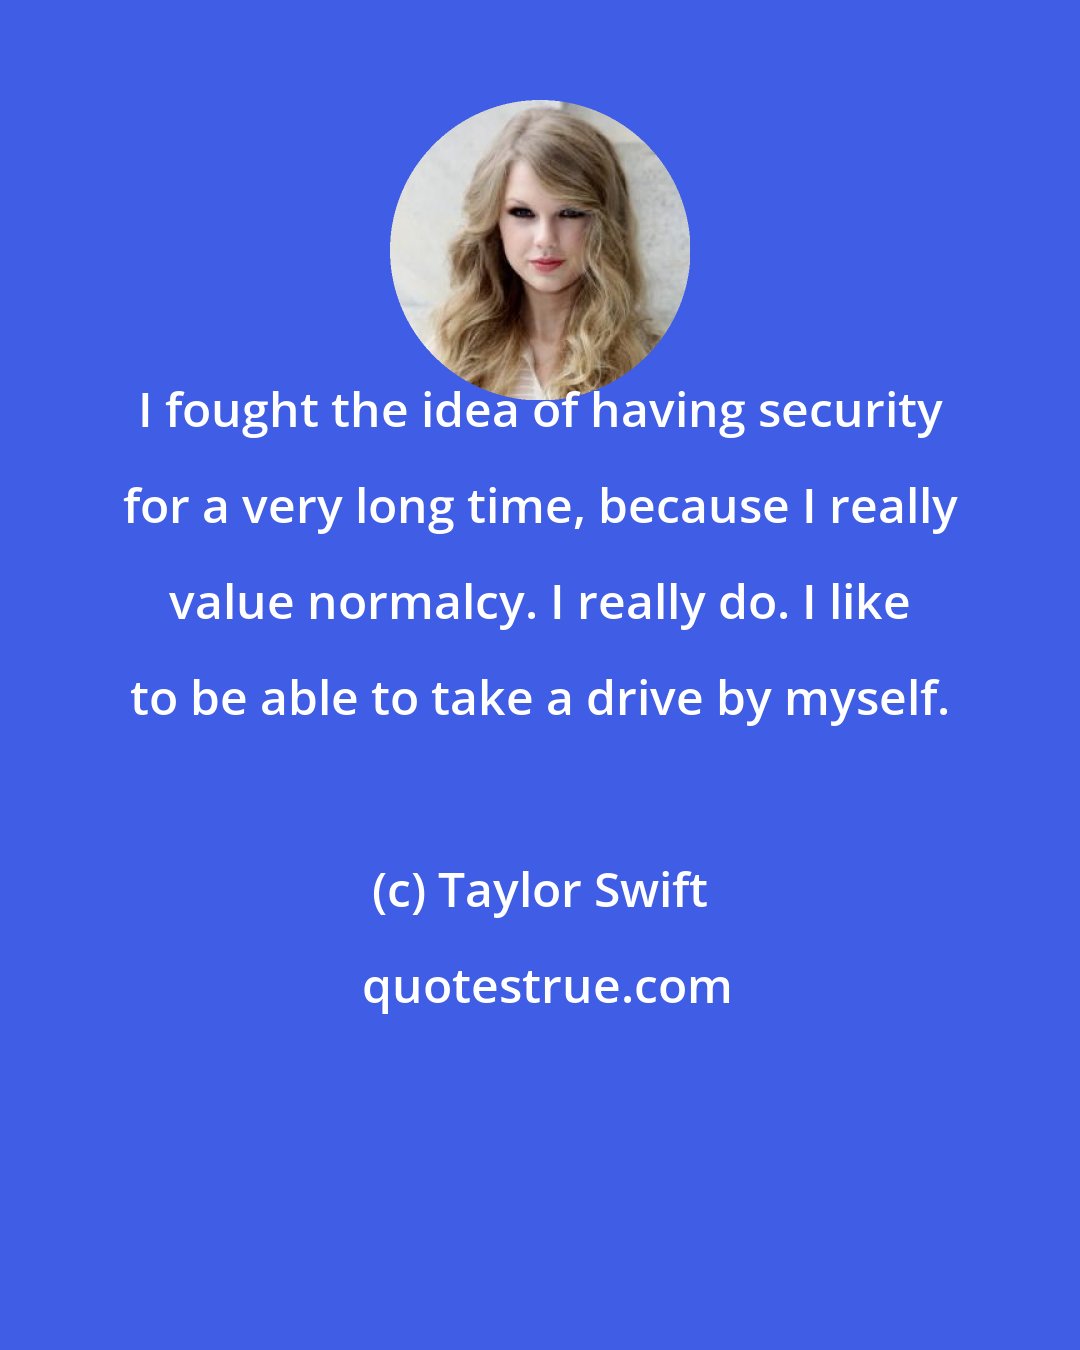 Taylor Swift: I fought the idea of having security for a very long time, because I really value normalcy. I really do. I like to be able to take a drive by myself.